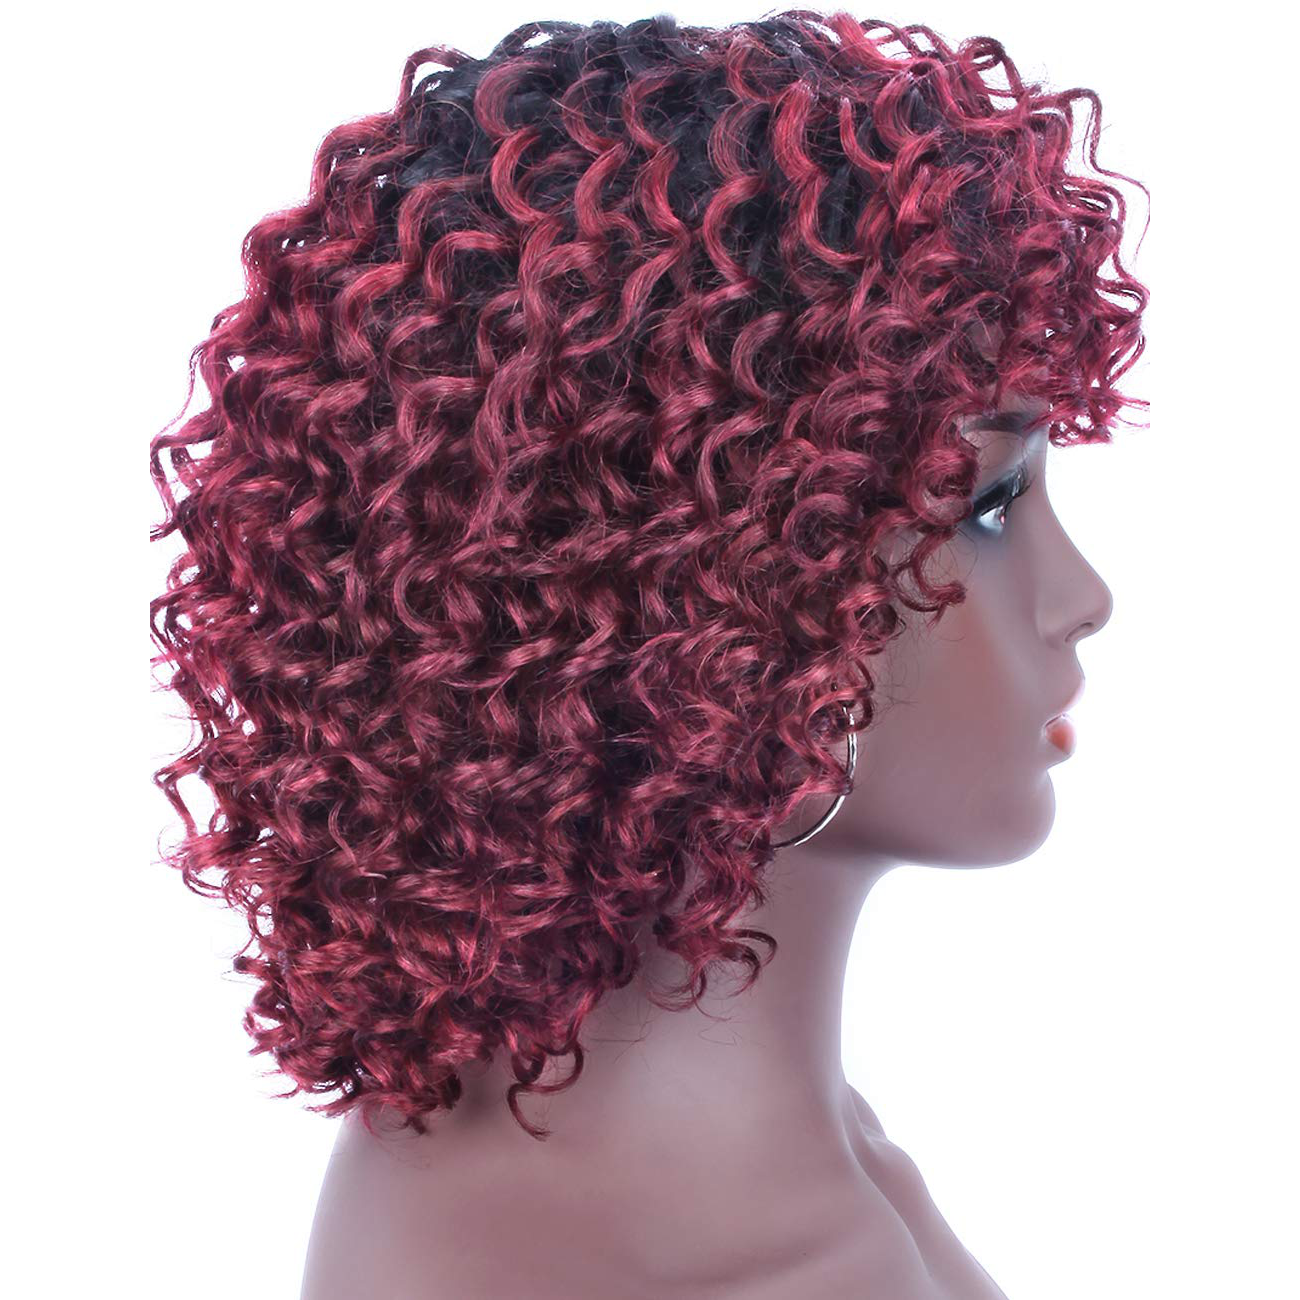 12 Inch Short Bob Wine Red Curly Human Hair Wig With Bangs